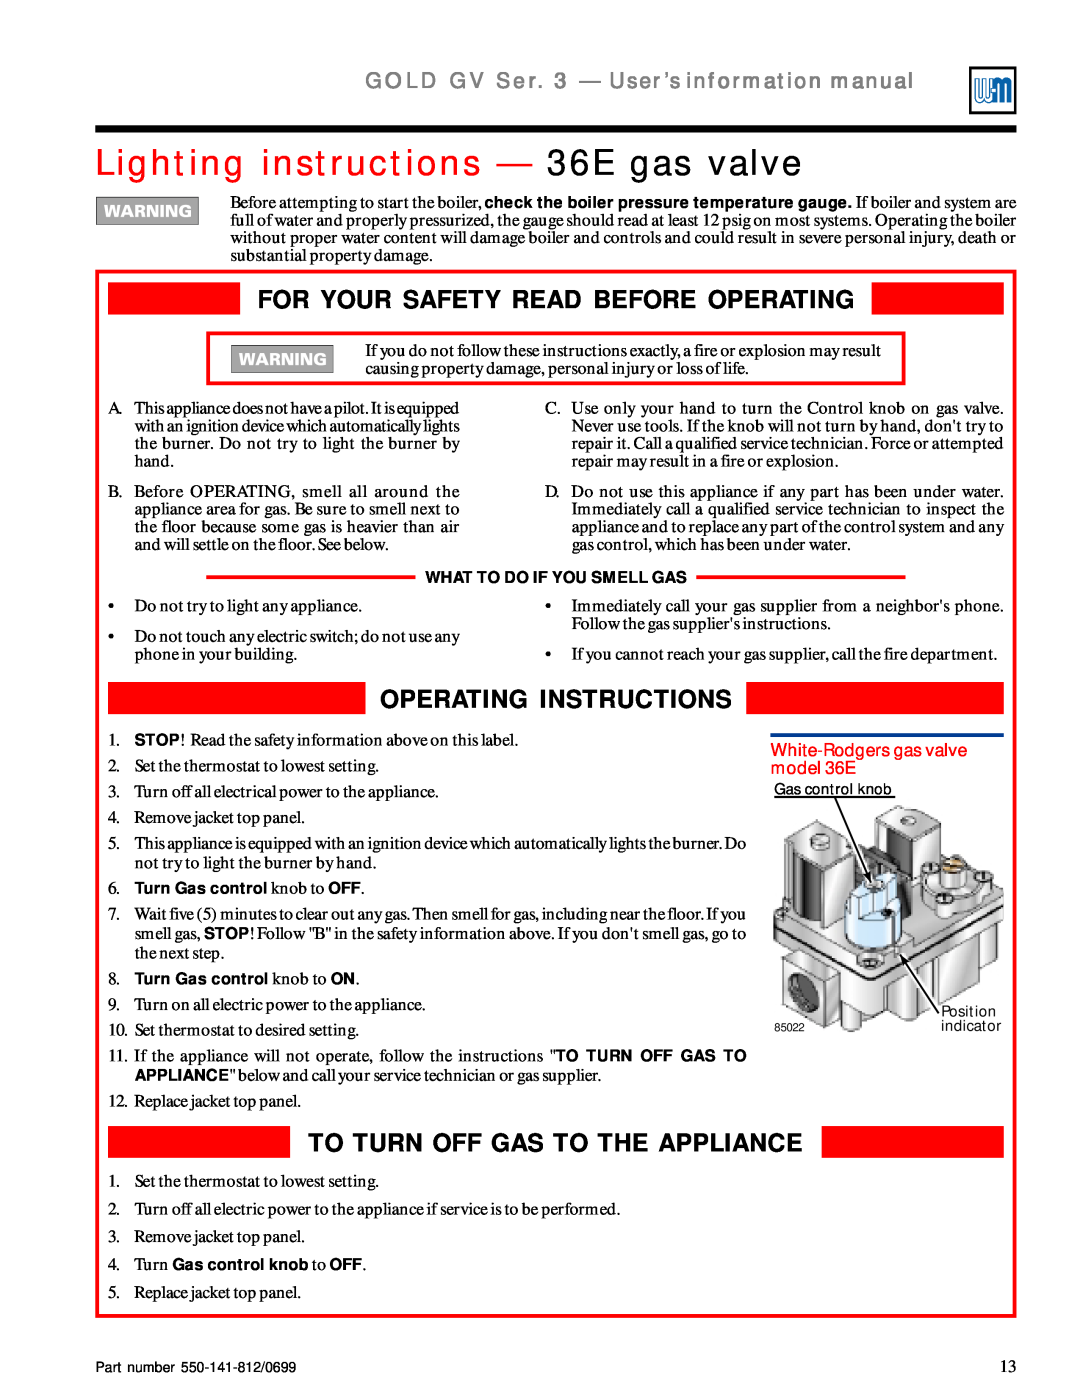 Weil-McLain 3 Series Lighting instructions — 36E gas valve, For Your Safety Read Before Operating, Operating Instructions 